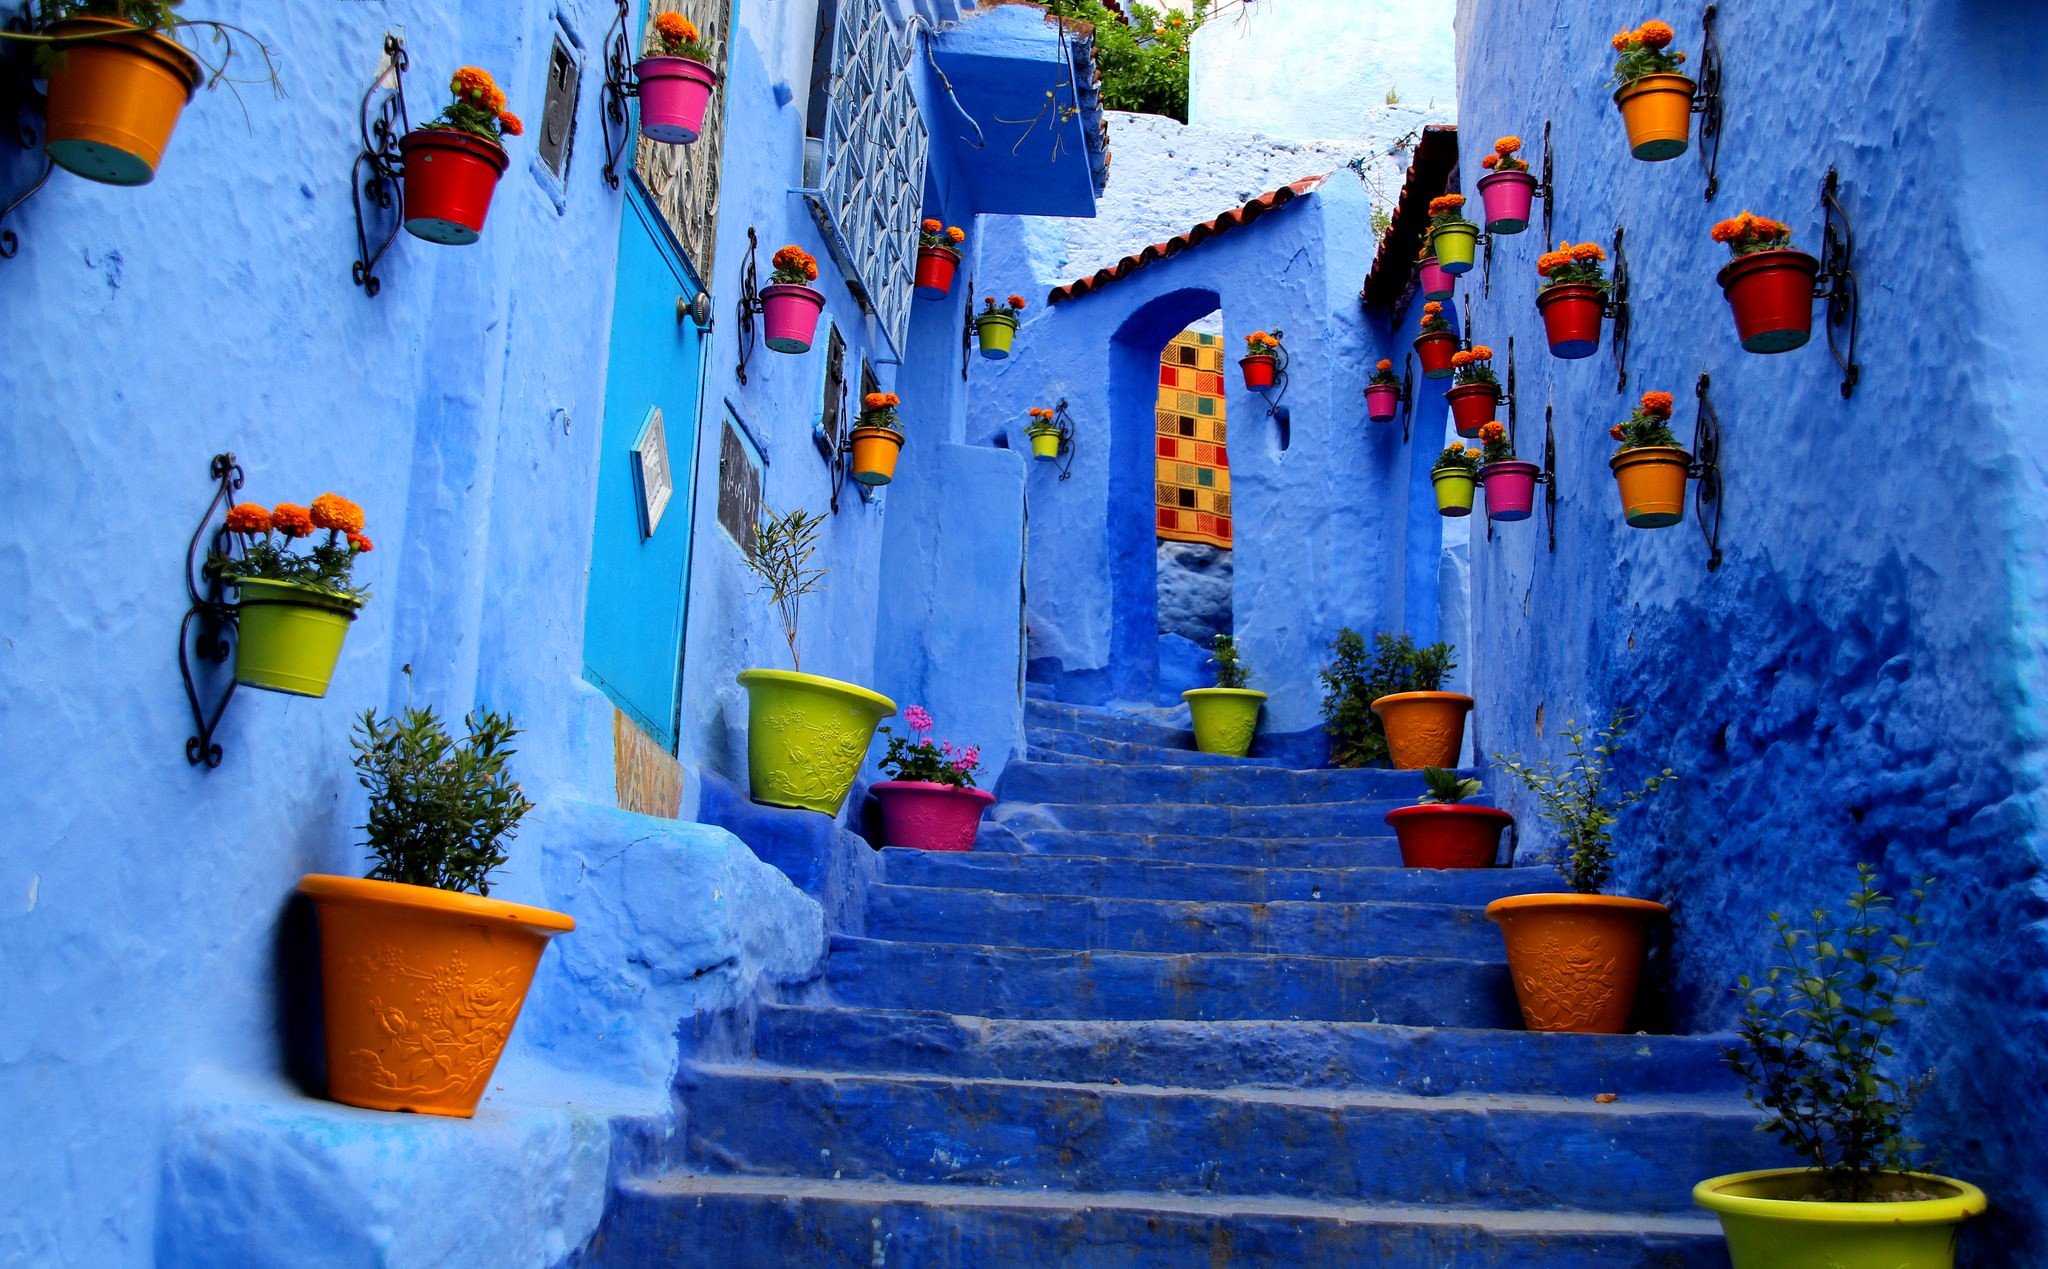 flowers-city-stairs-blue-photography-1080P-wallpaper.jpg